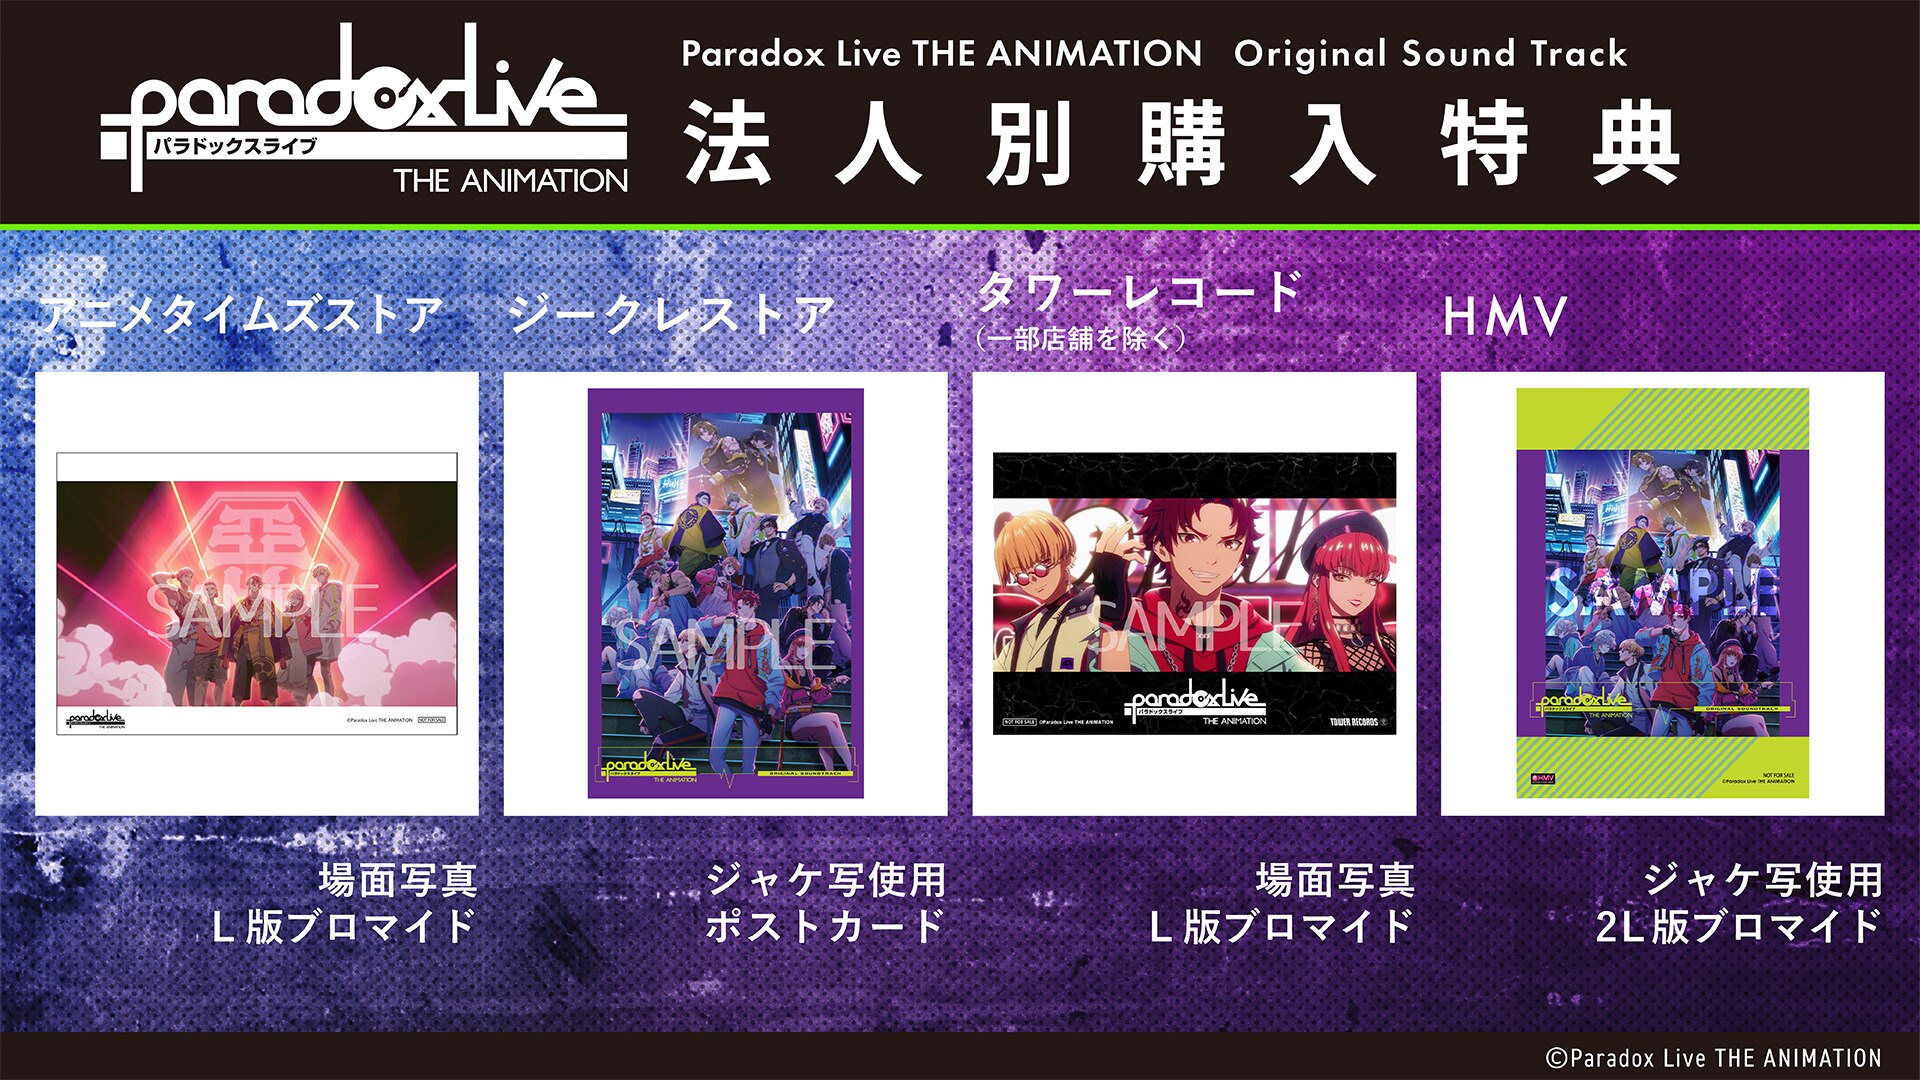 DISC OGRAPHY | “Paradox Live THE ANIMATION” official website